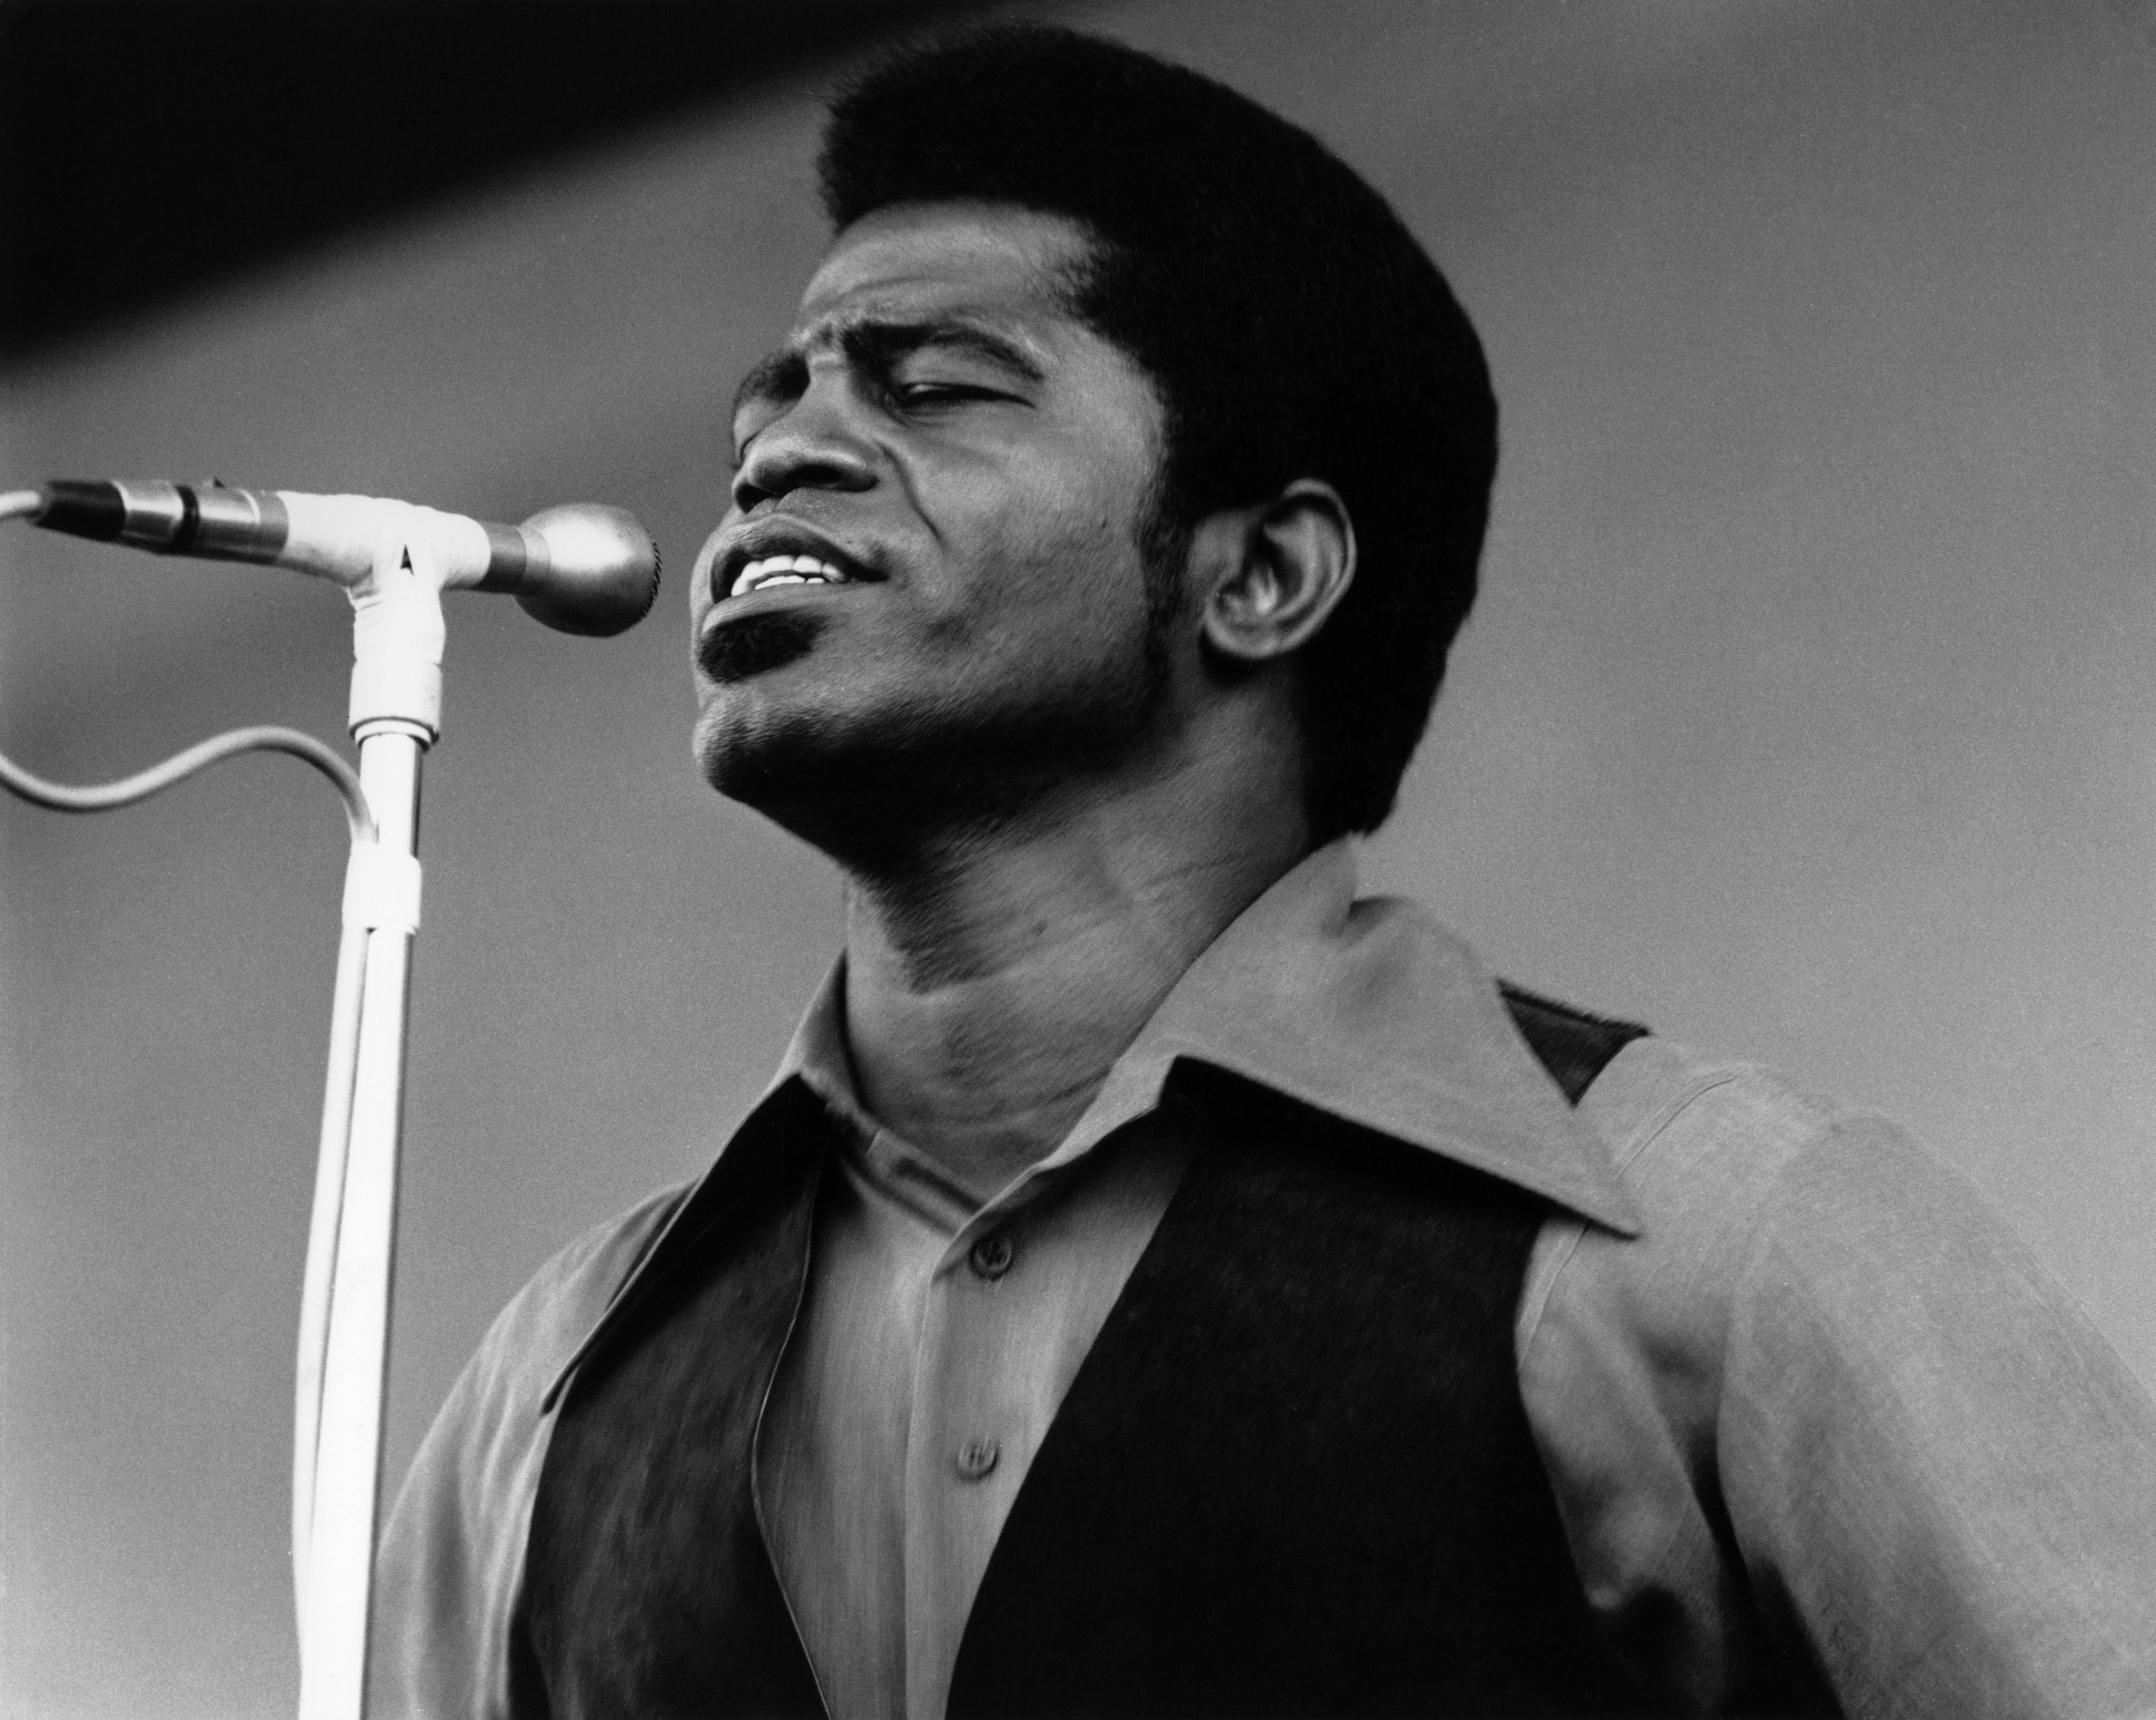 James Brown performs live on stage at the Newport Jazz Festival in Newport, Rhode Island on the afternoon of July 6, 1969 | Source: Getty Images